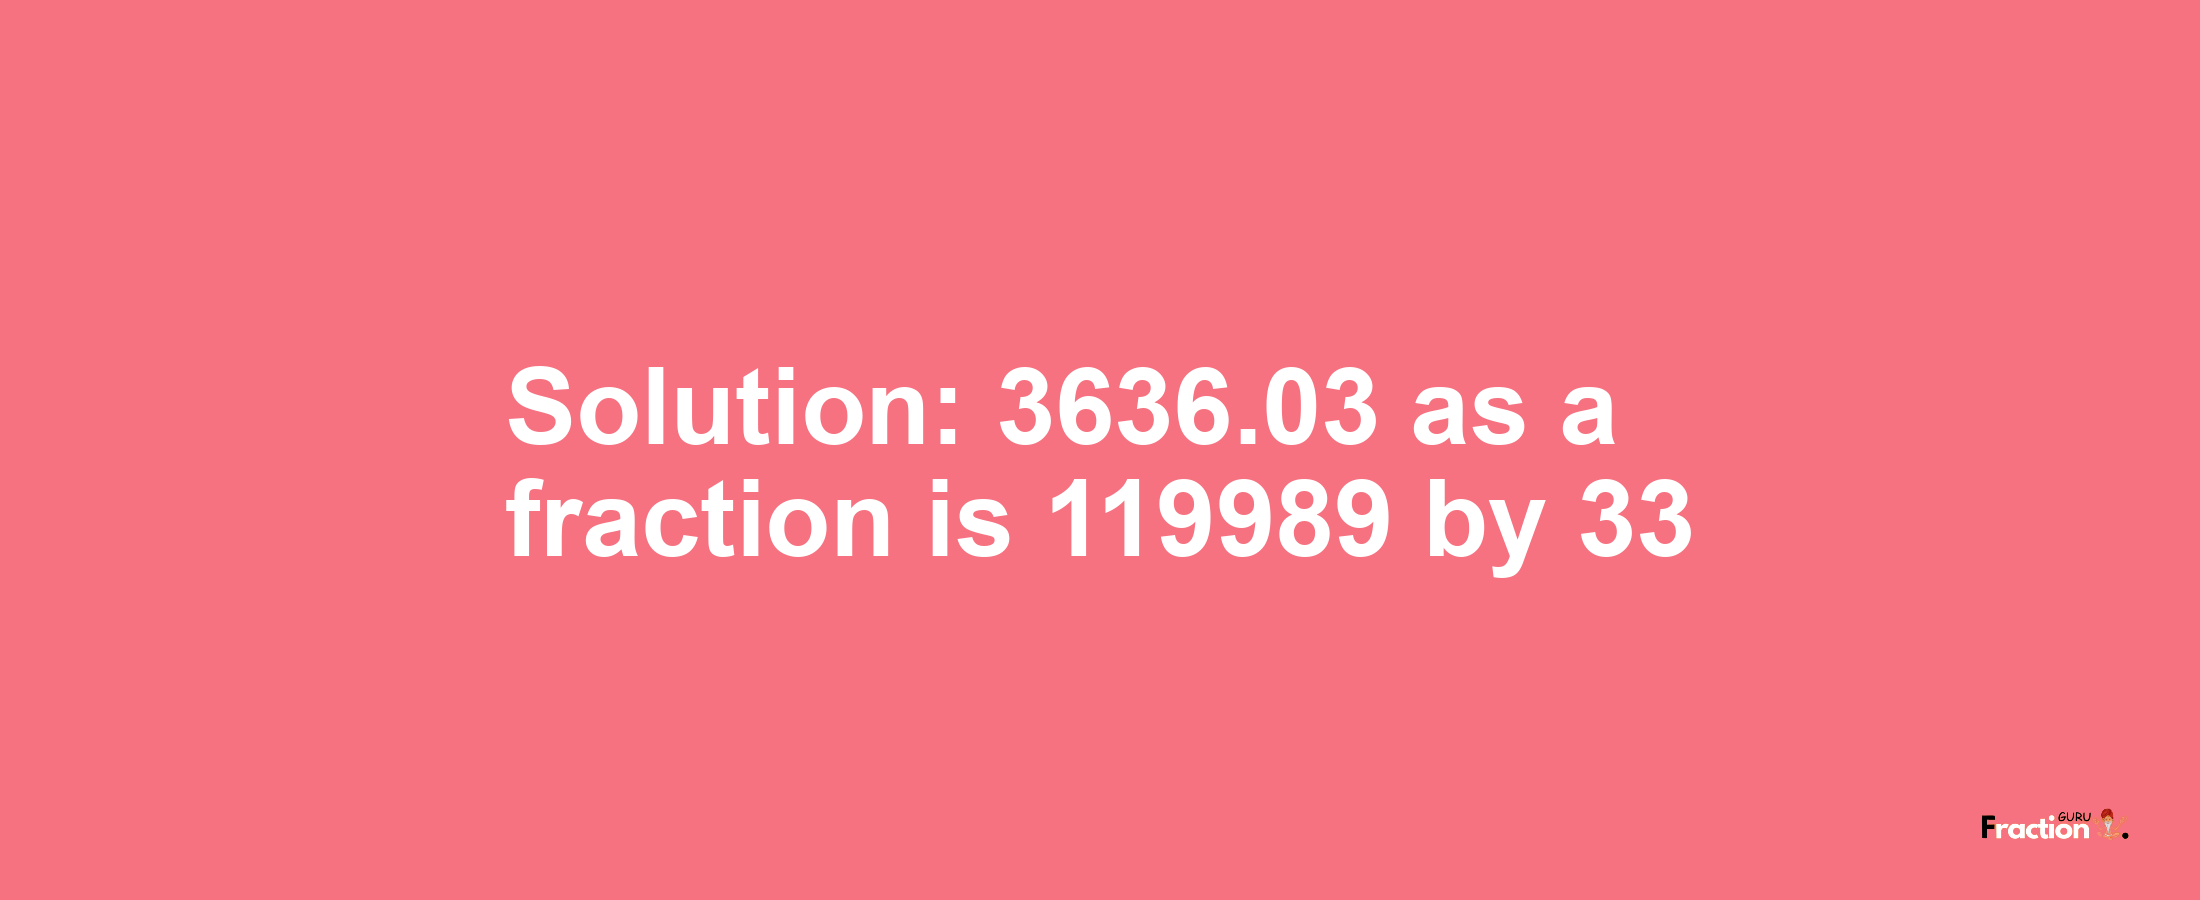 Solution:3636.03 as a fraction is 119989/33